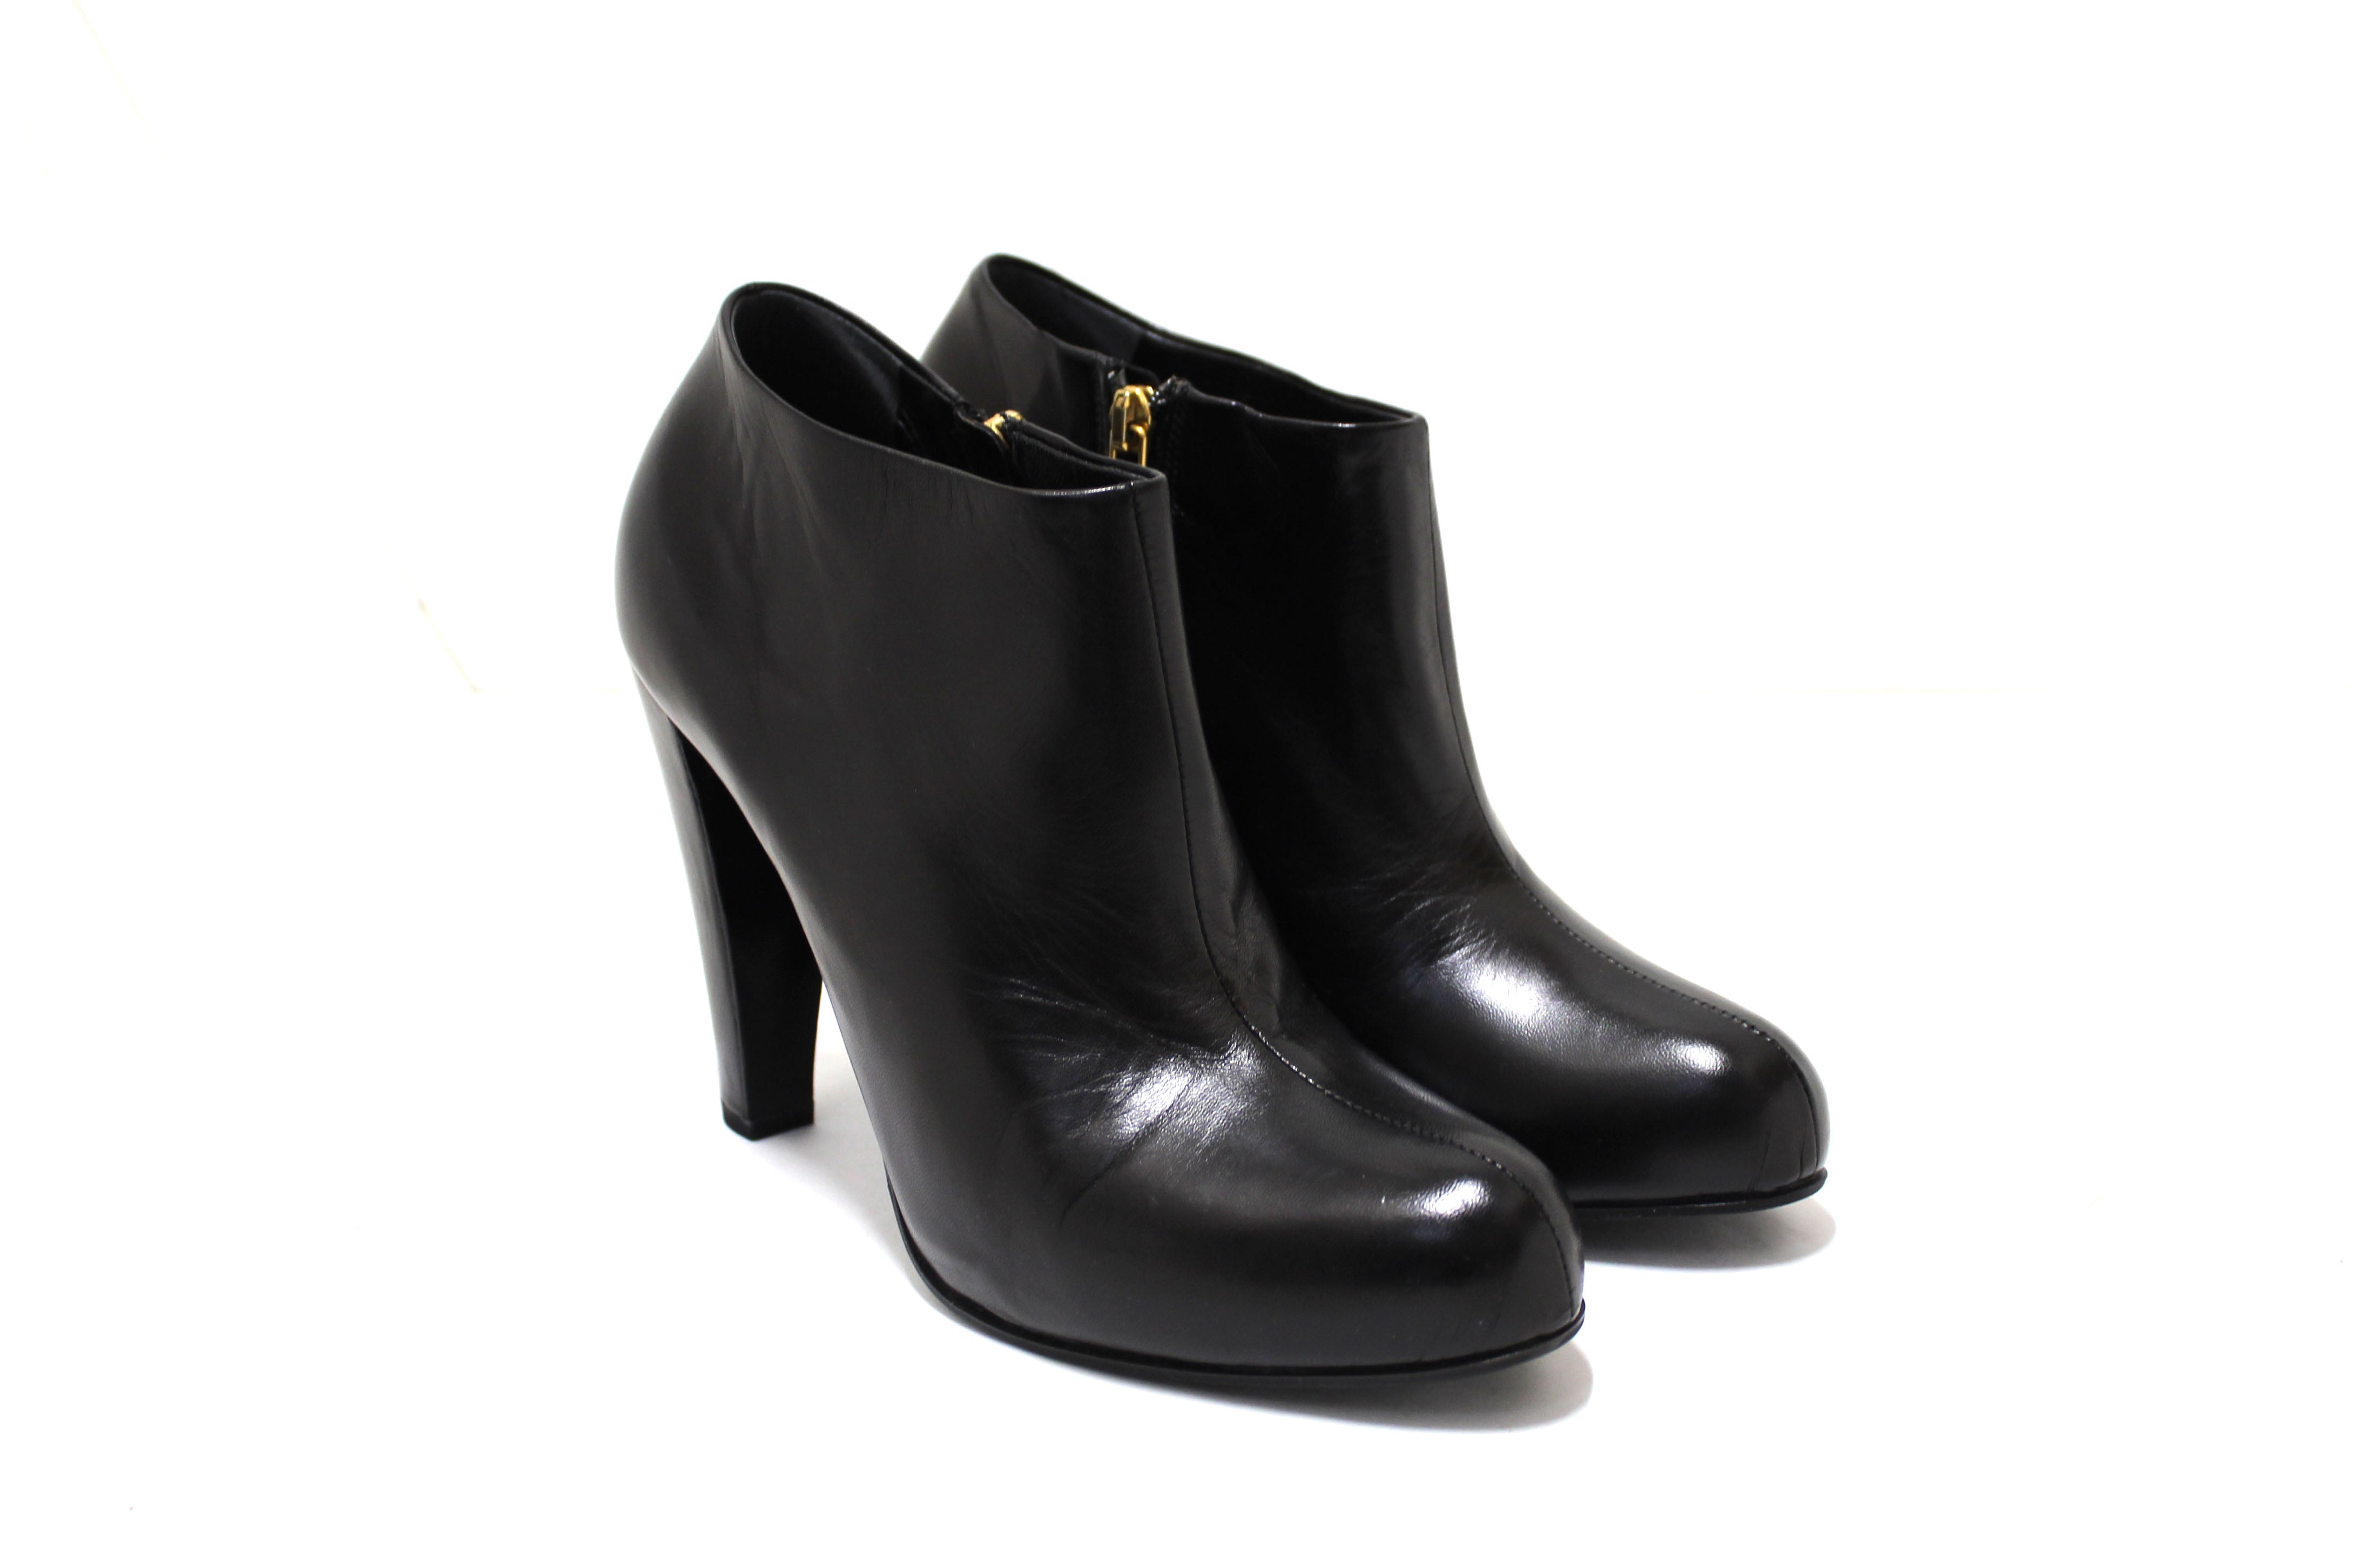 Authentic Miu Miu Black Leather Ankle Heel Boots Size 38